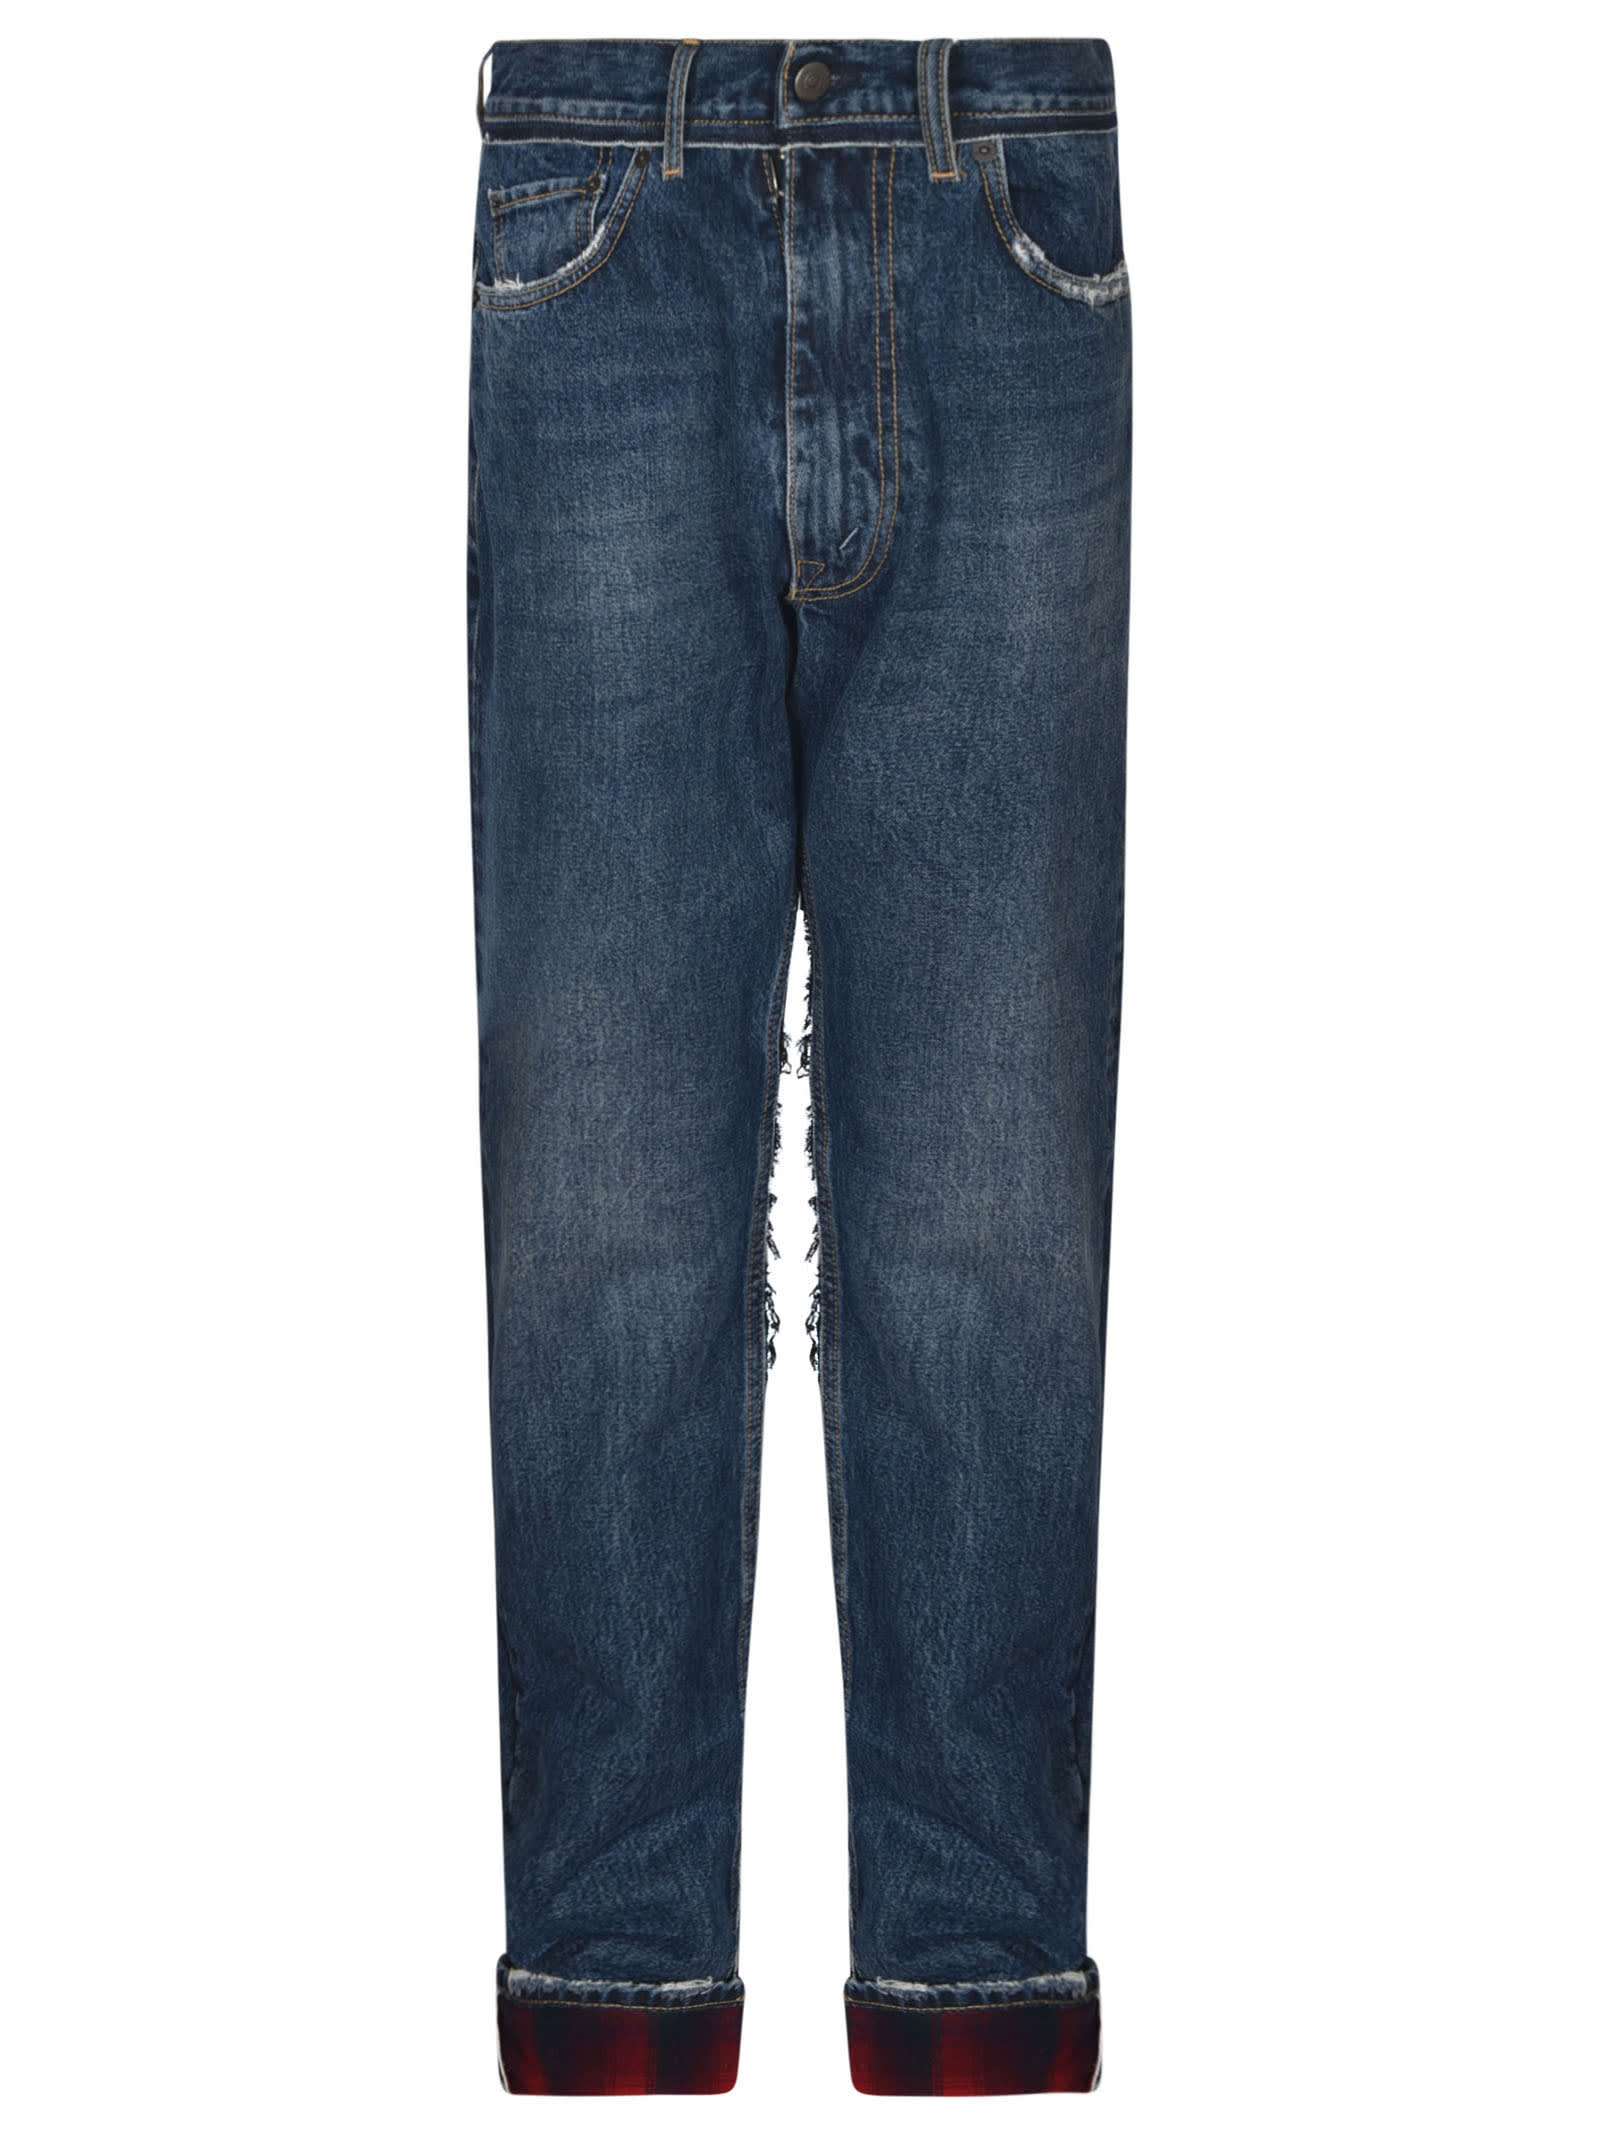 MAISON MARGIELA BUTTON FITTED JEANS